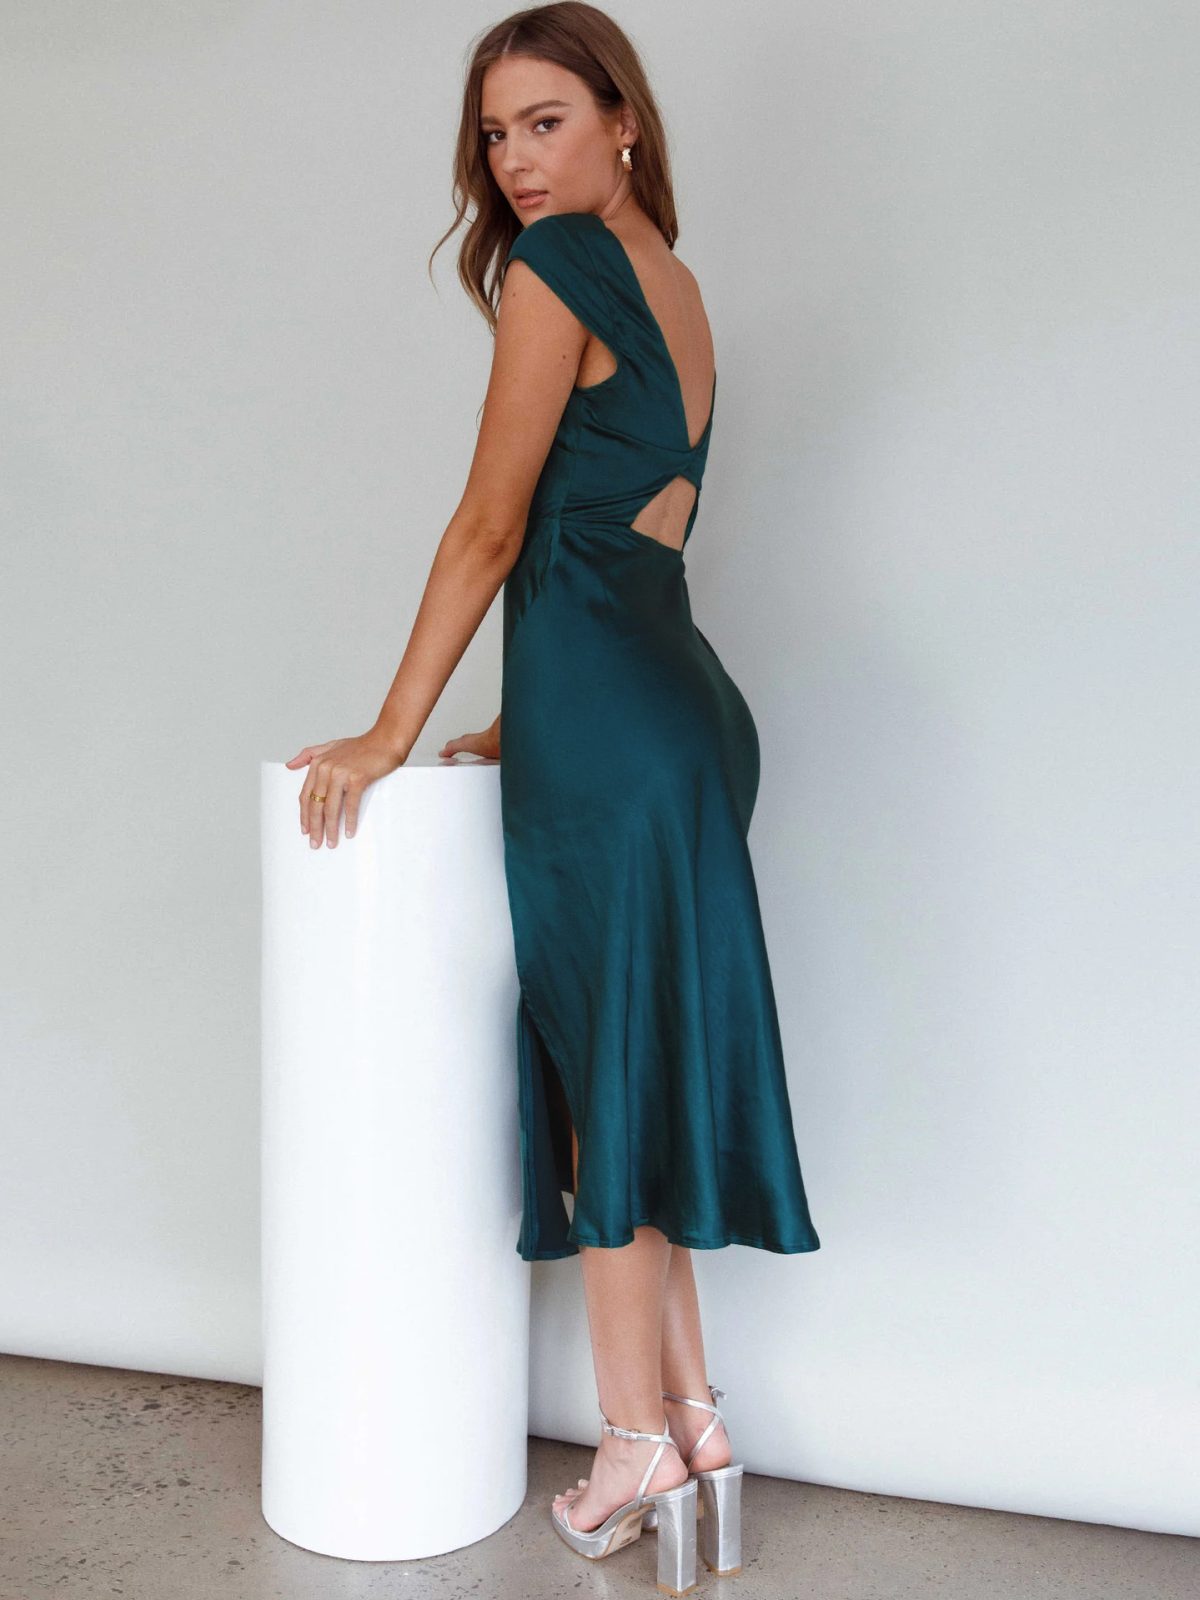 Sexy Slimming Backless Pure Satin Evening Dress in Dresses